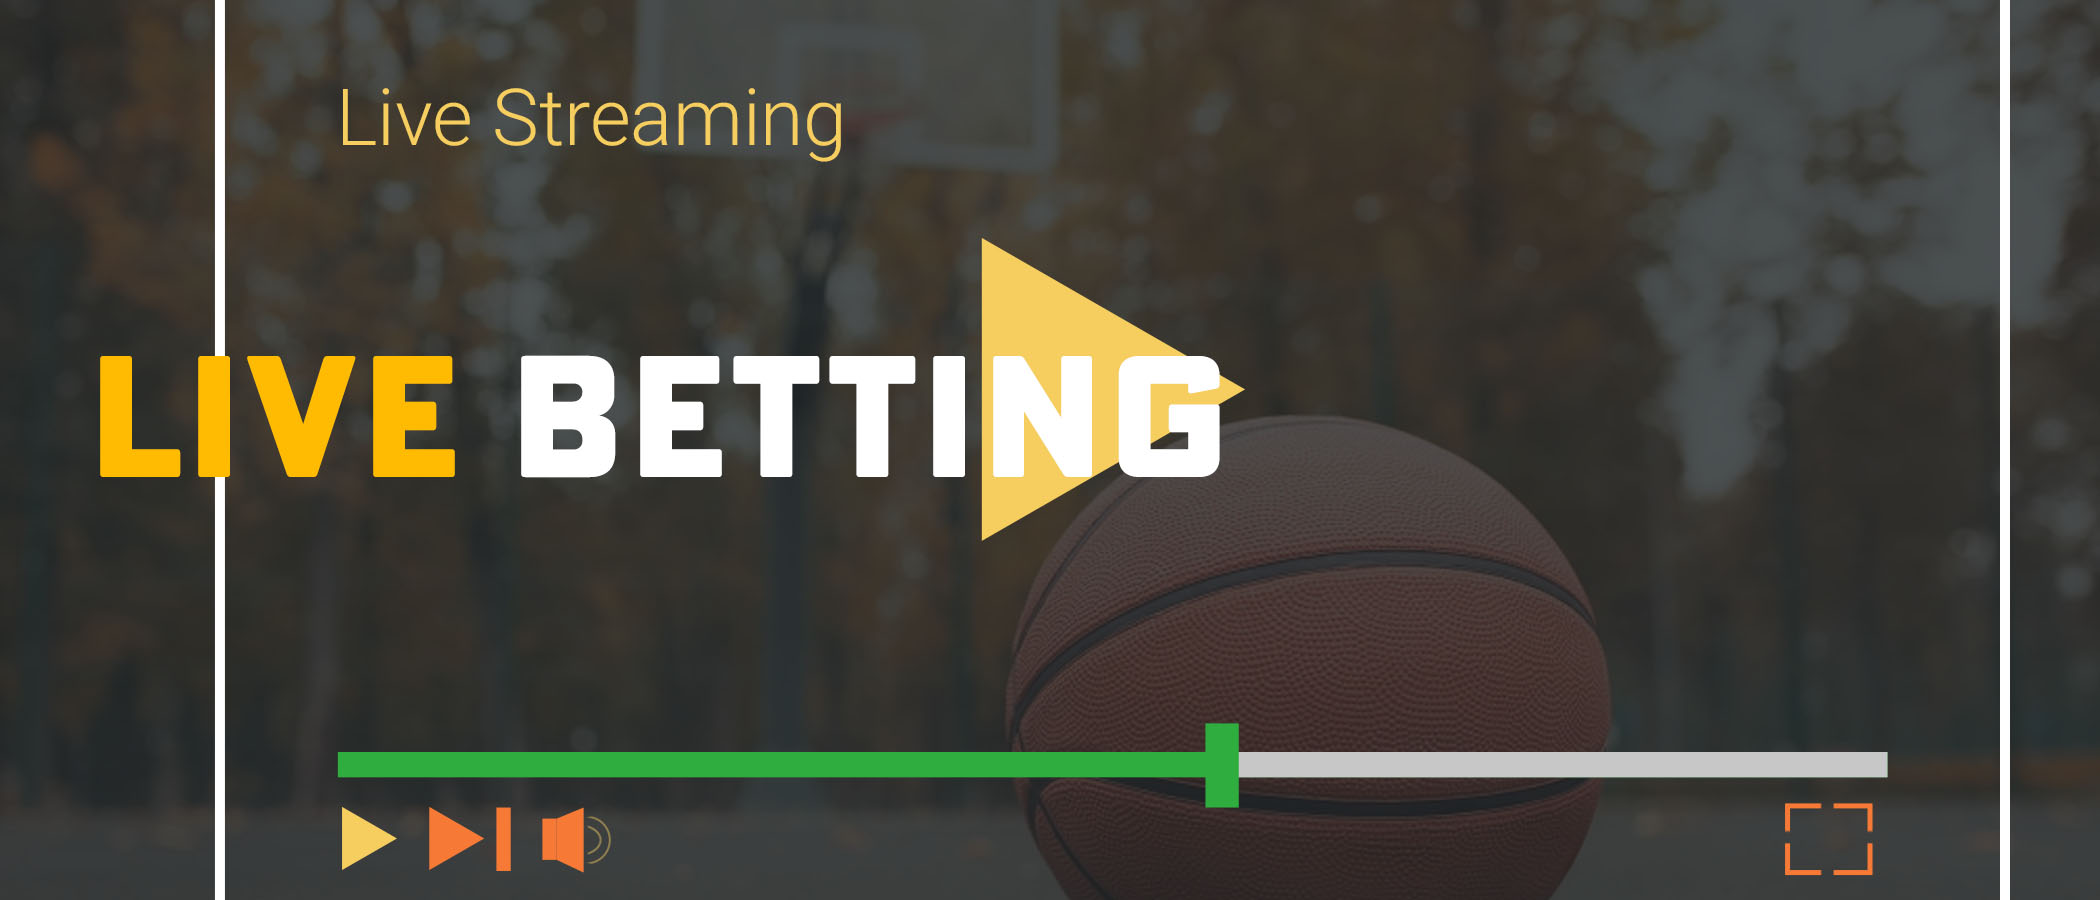 Melbet official website supports live betting